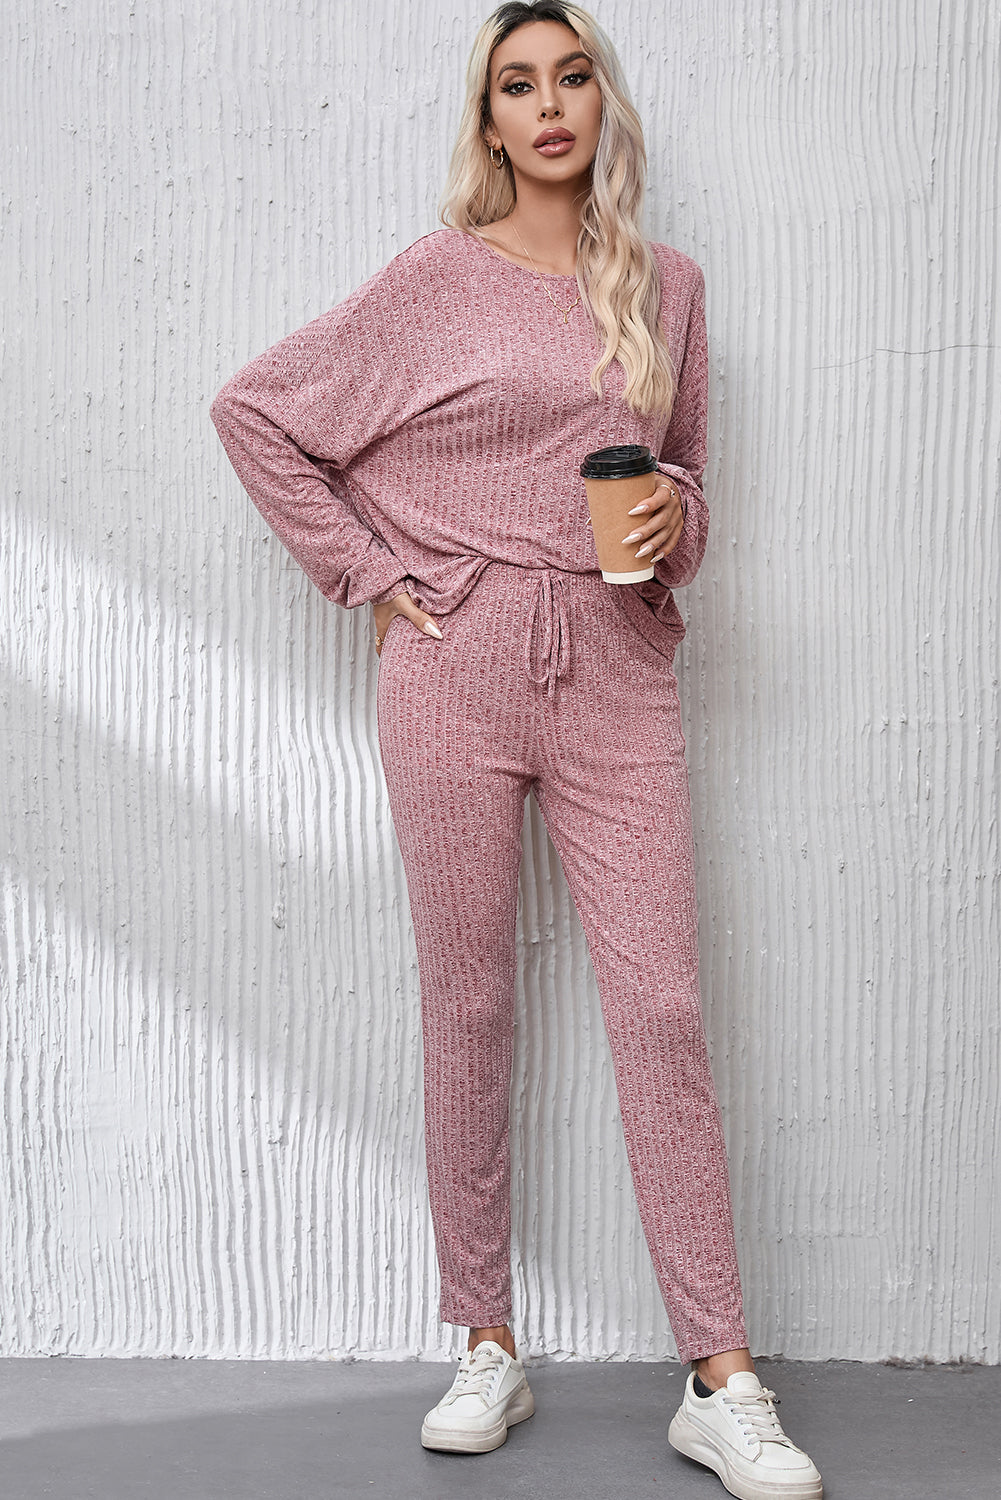 Peach Blossom Ribbed Drop Shoulder Top and Knot Waist Leggings Set